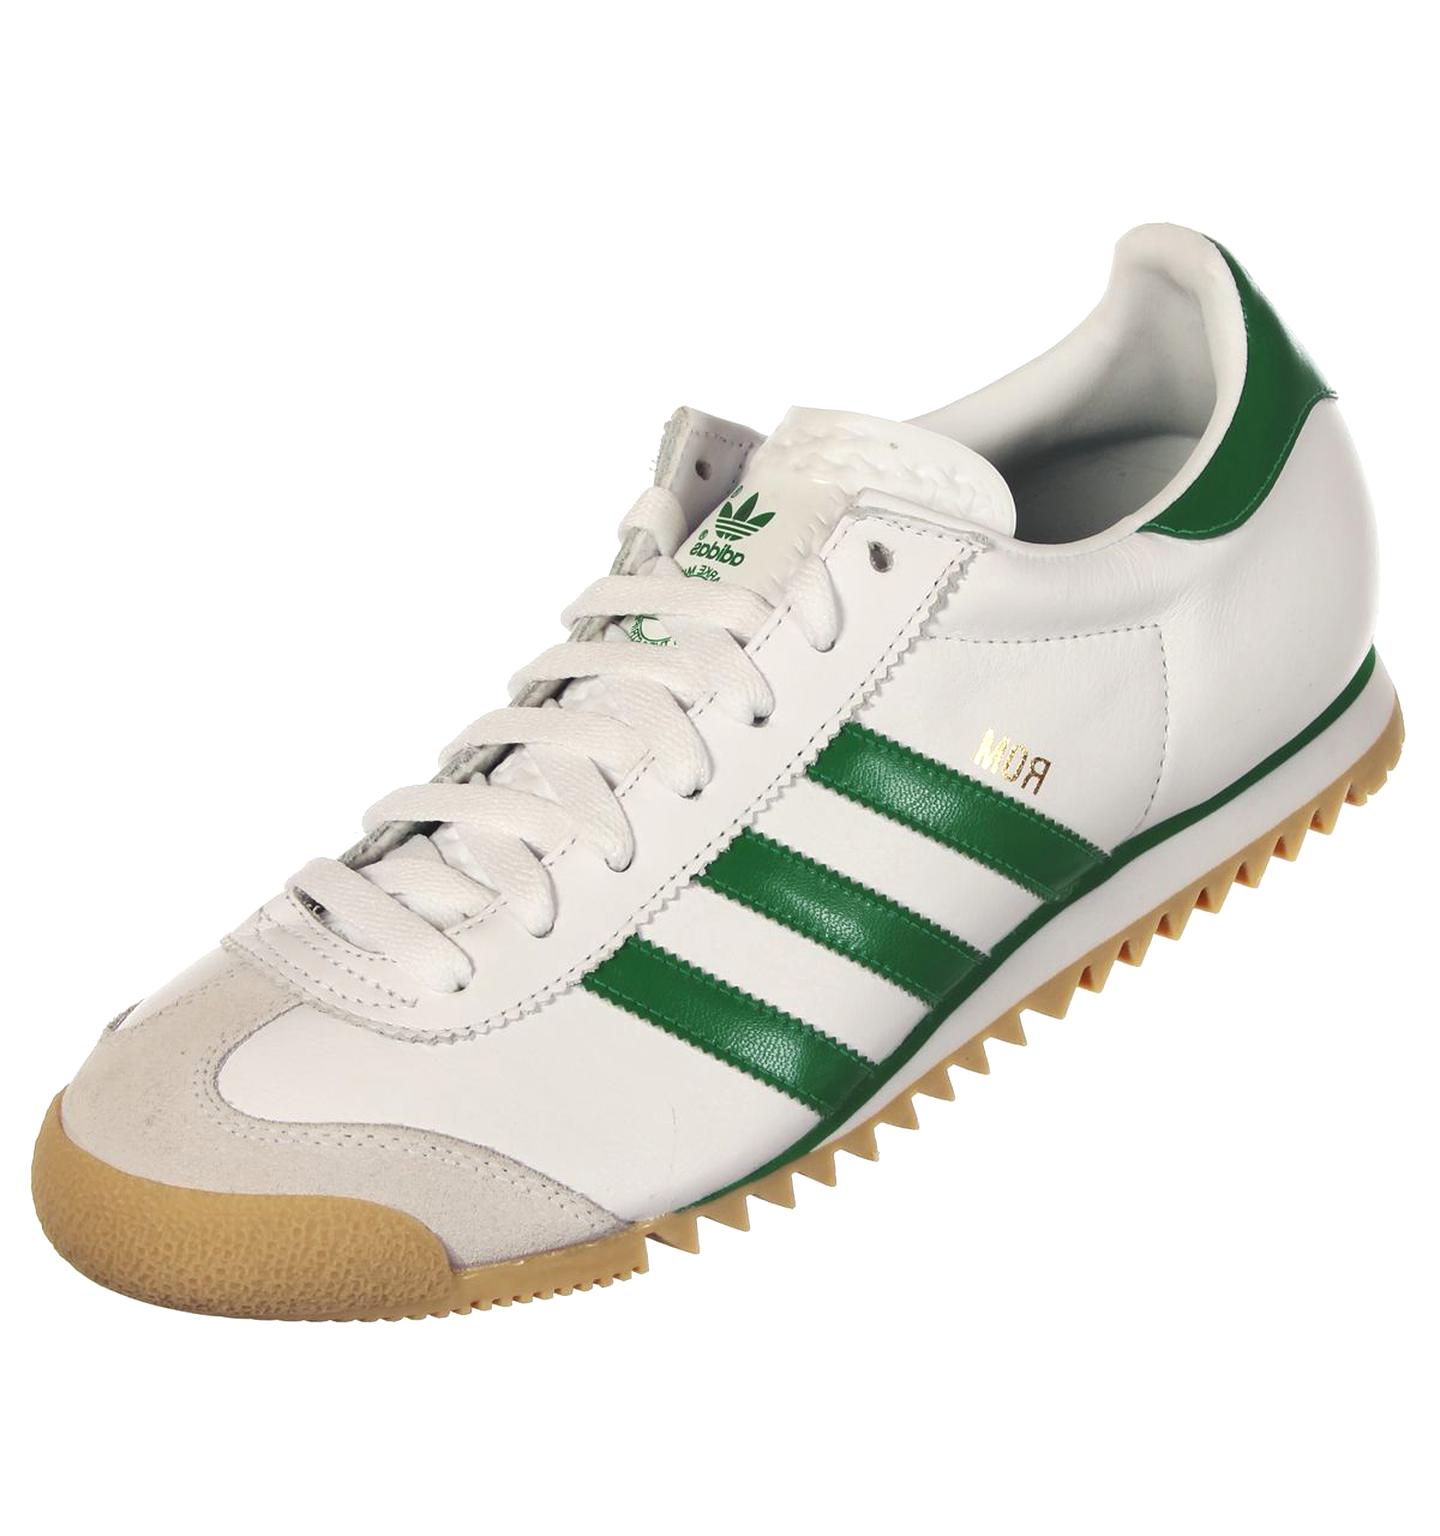 Adidas Trainers Retro for sale in UK | View 66 bargains